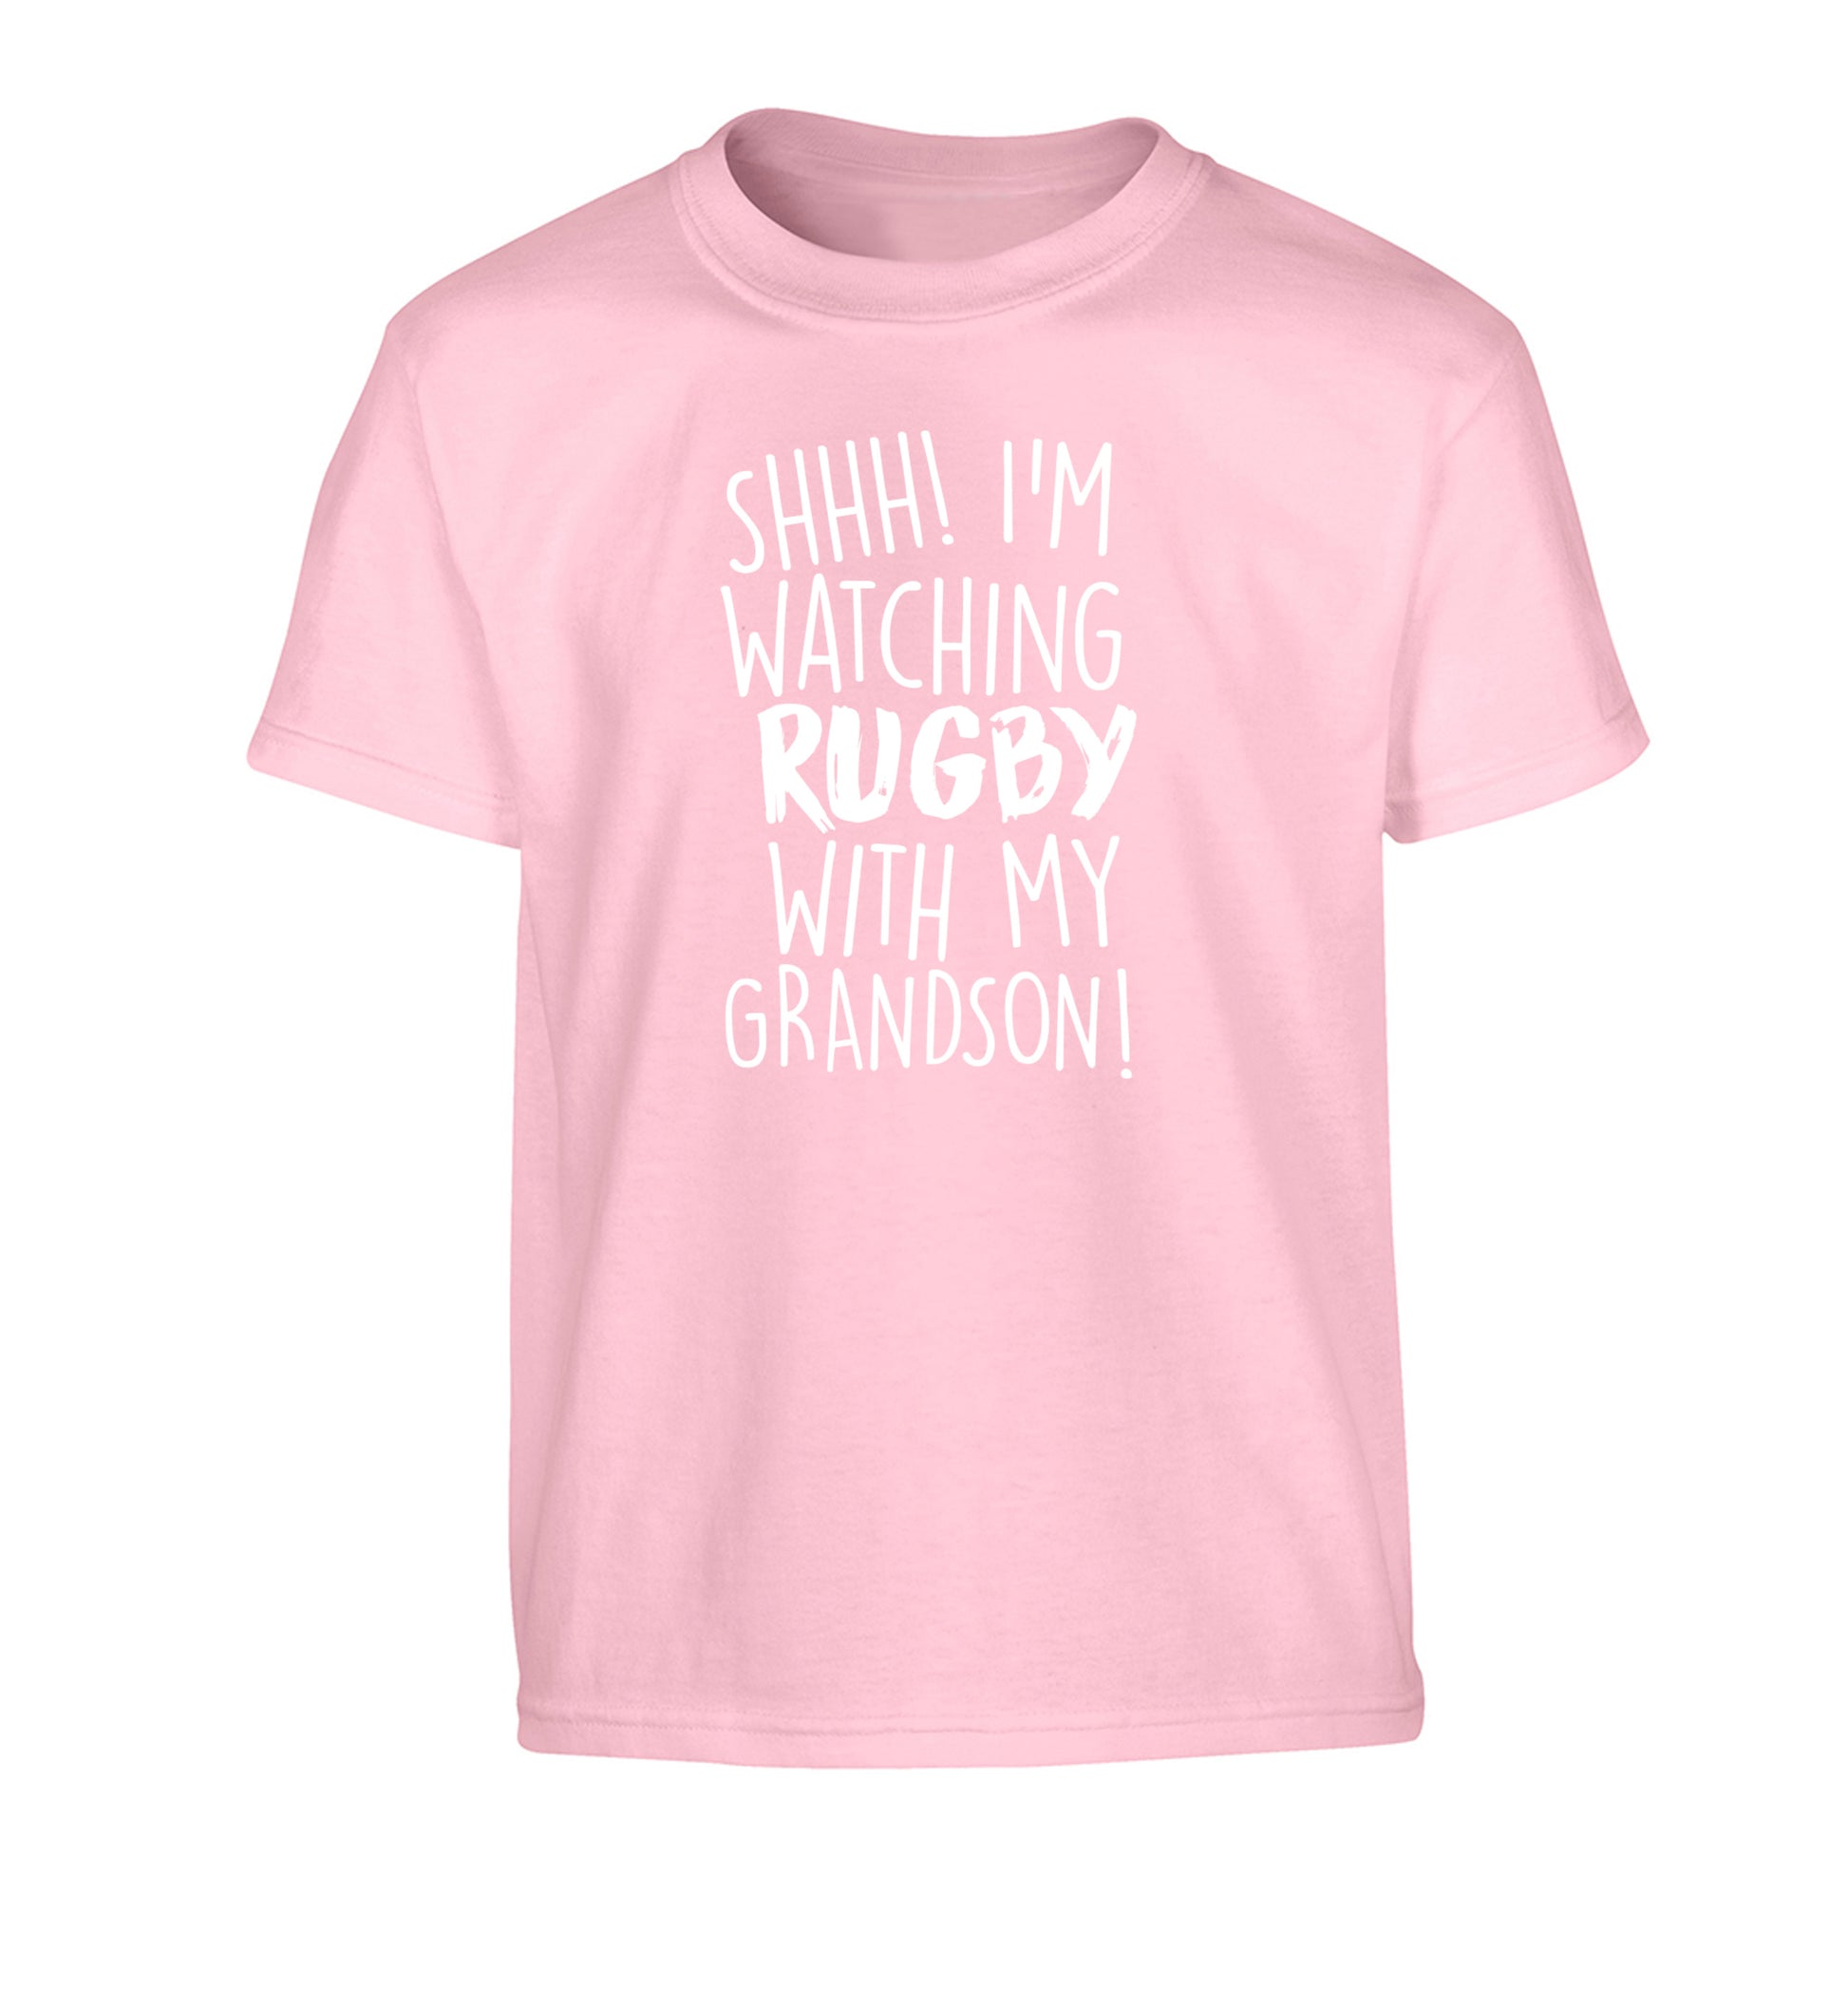 Shh I'm watching rugby with my grandson Children's light pink Tshirt 12-13 Years